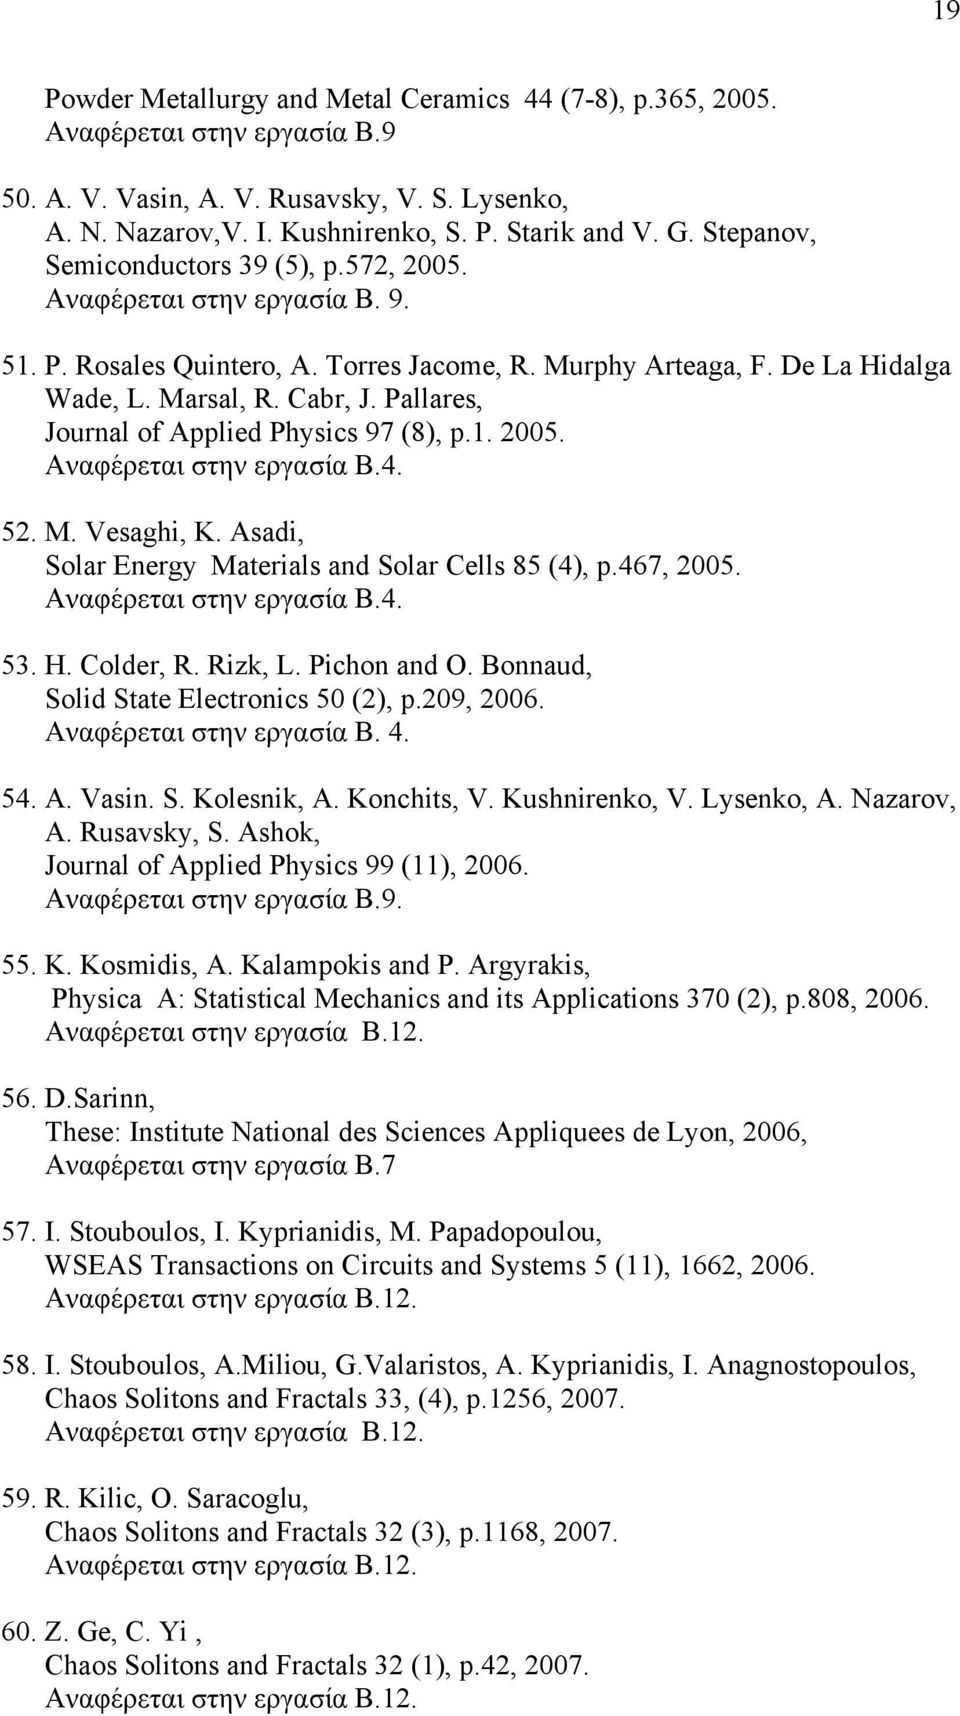 Pallares, Journal of Applied Physics 97 (8), p.1. 2005.. 52. M. Vesaghi, K. Asadi, Solar Energy Materials and Solar Cells 85 (4), p.467, 2005.. 53. H. Colder, R. Rizk, L. Pichon and O.